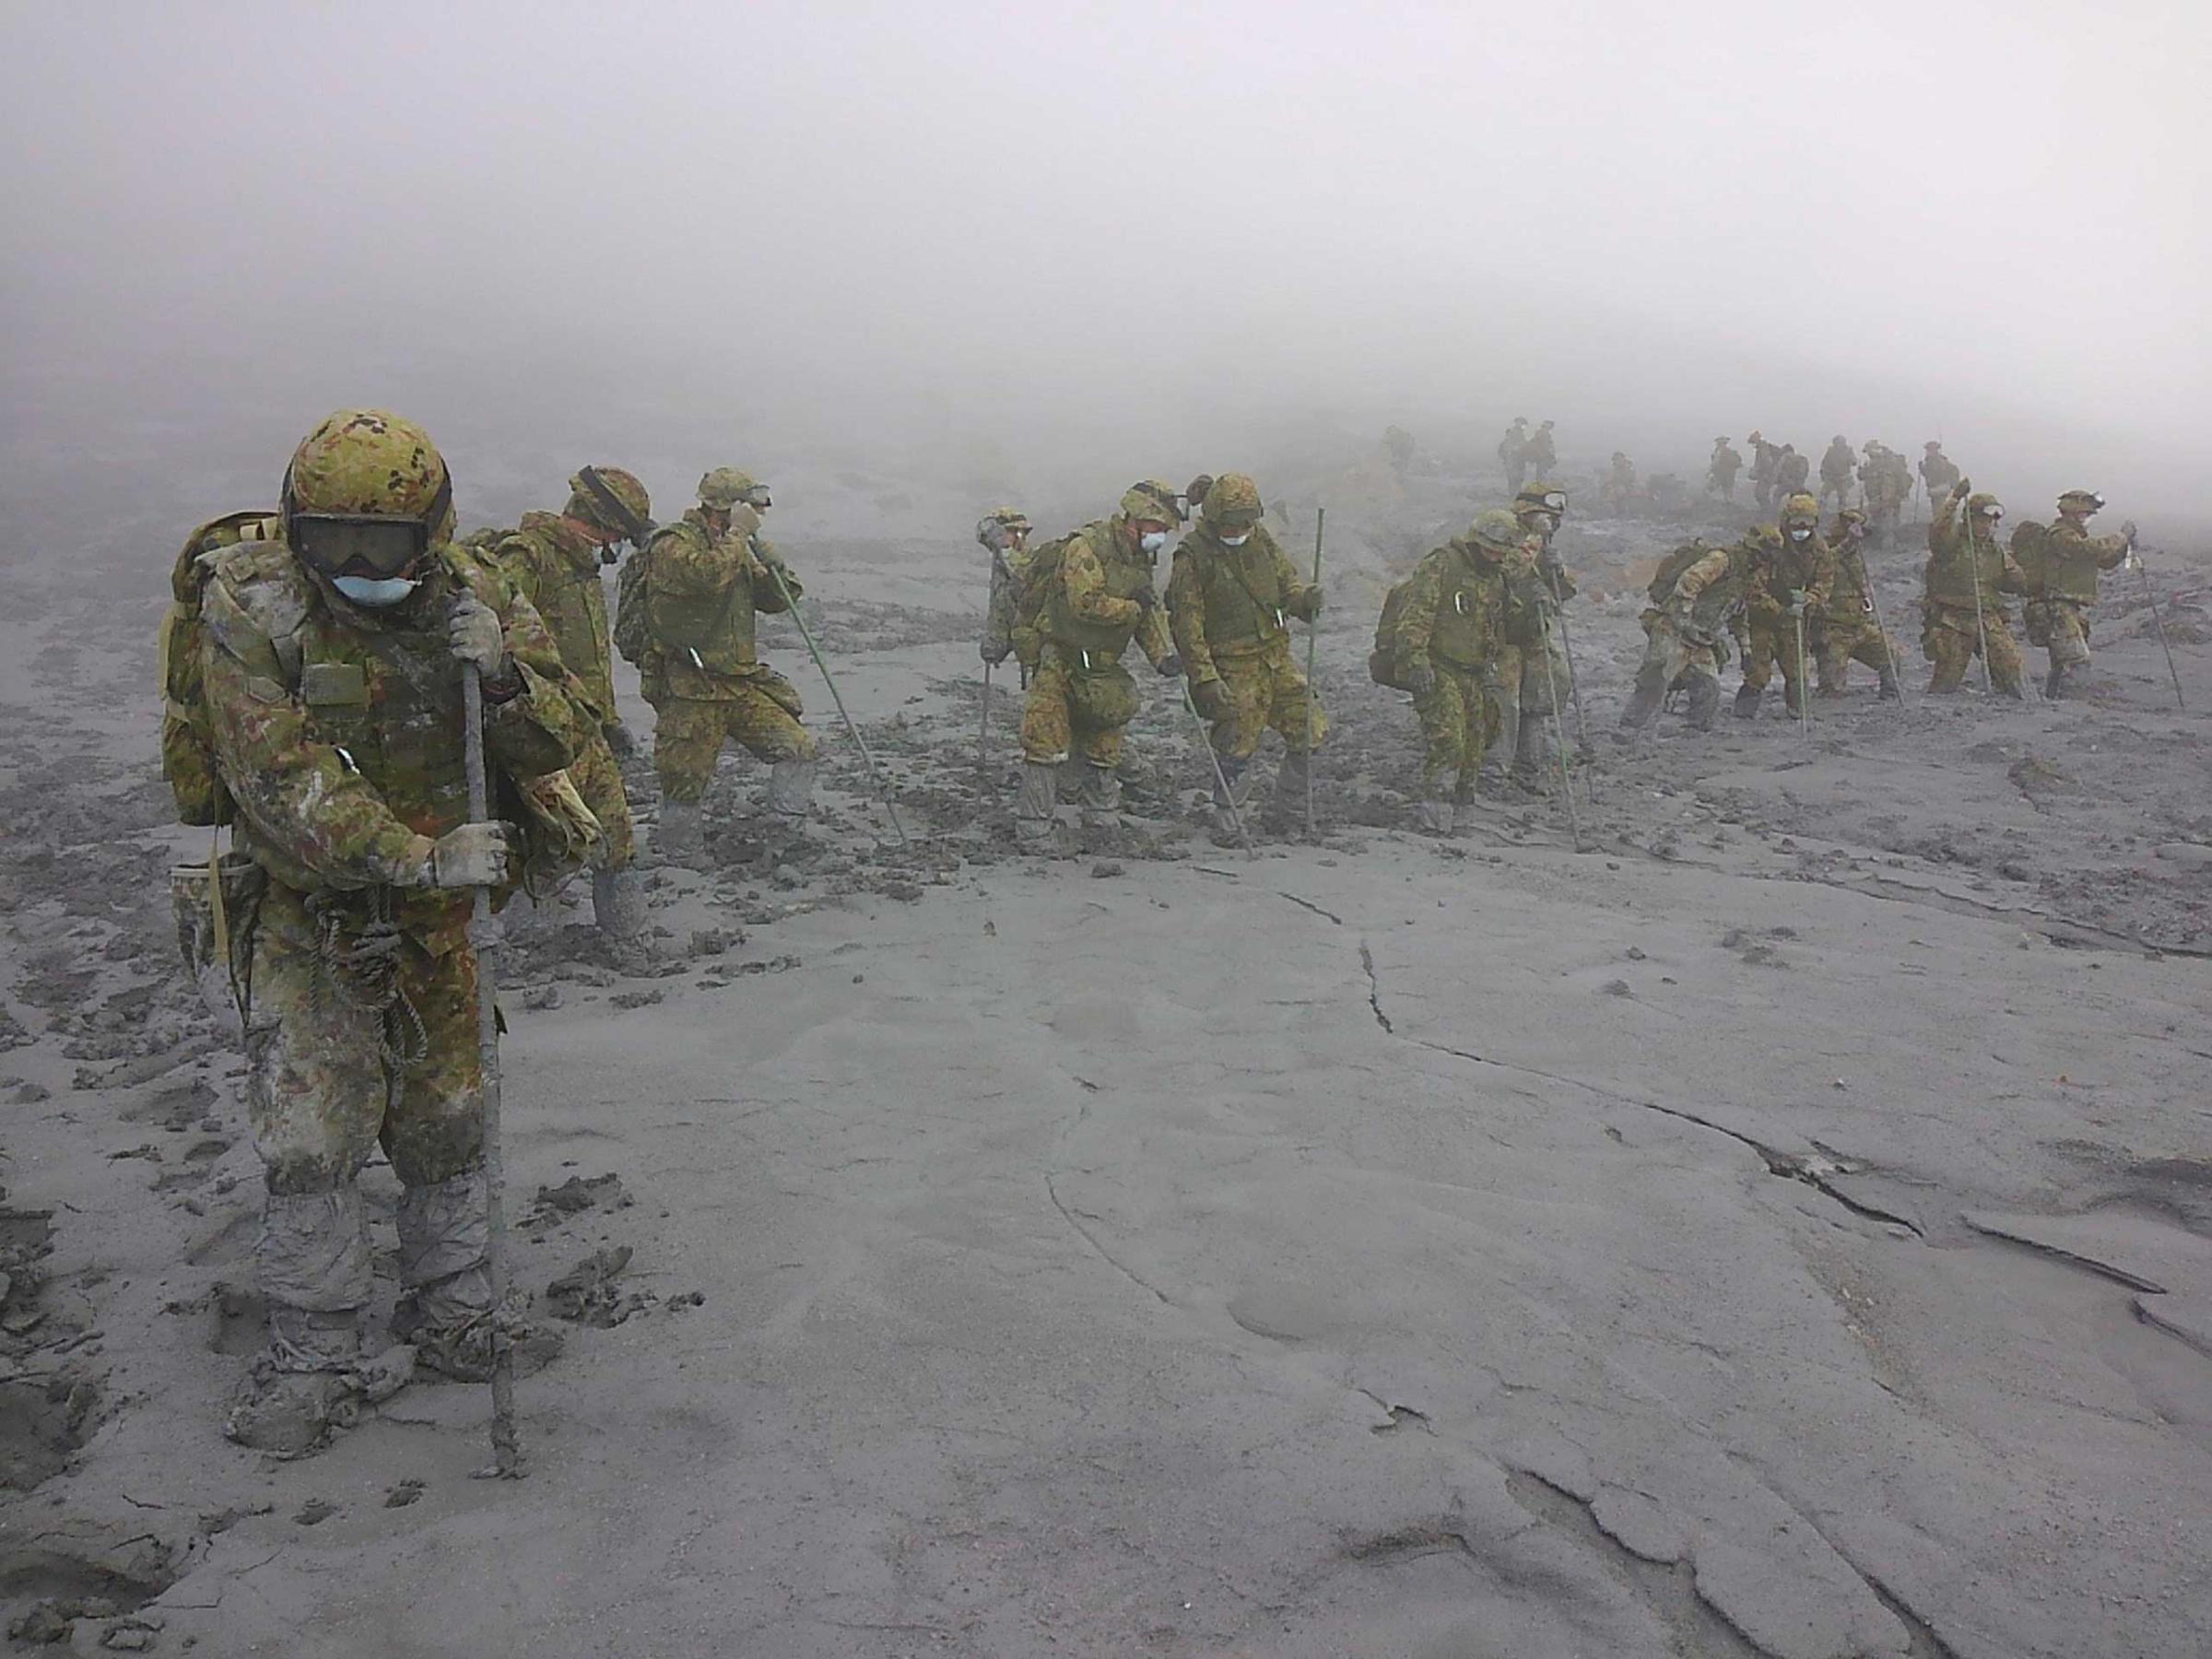 JSDF soldiers conduct rescue operations on Mount Ontake, which erupted on September 27, 2014 and straddles Nagano and Gifu prefectures in central Japan